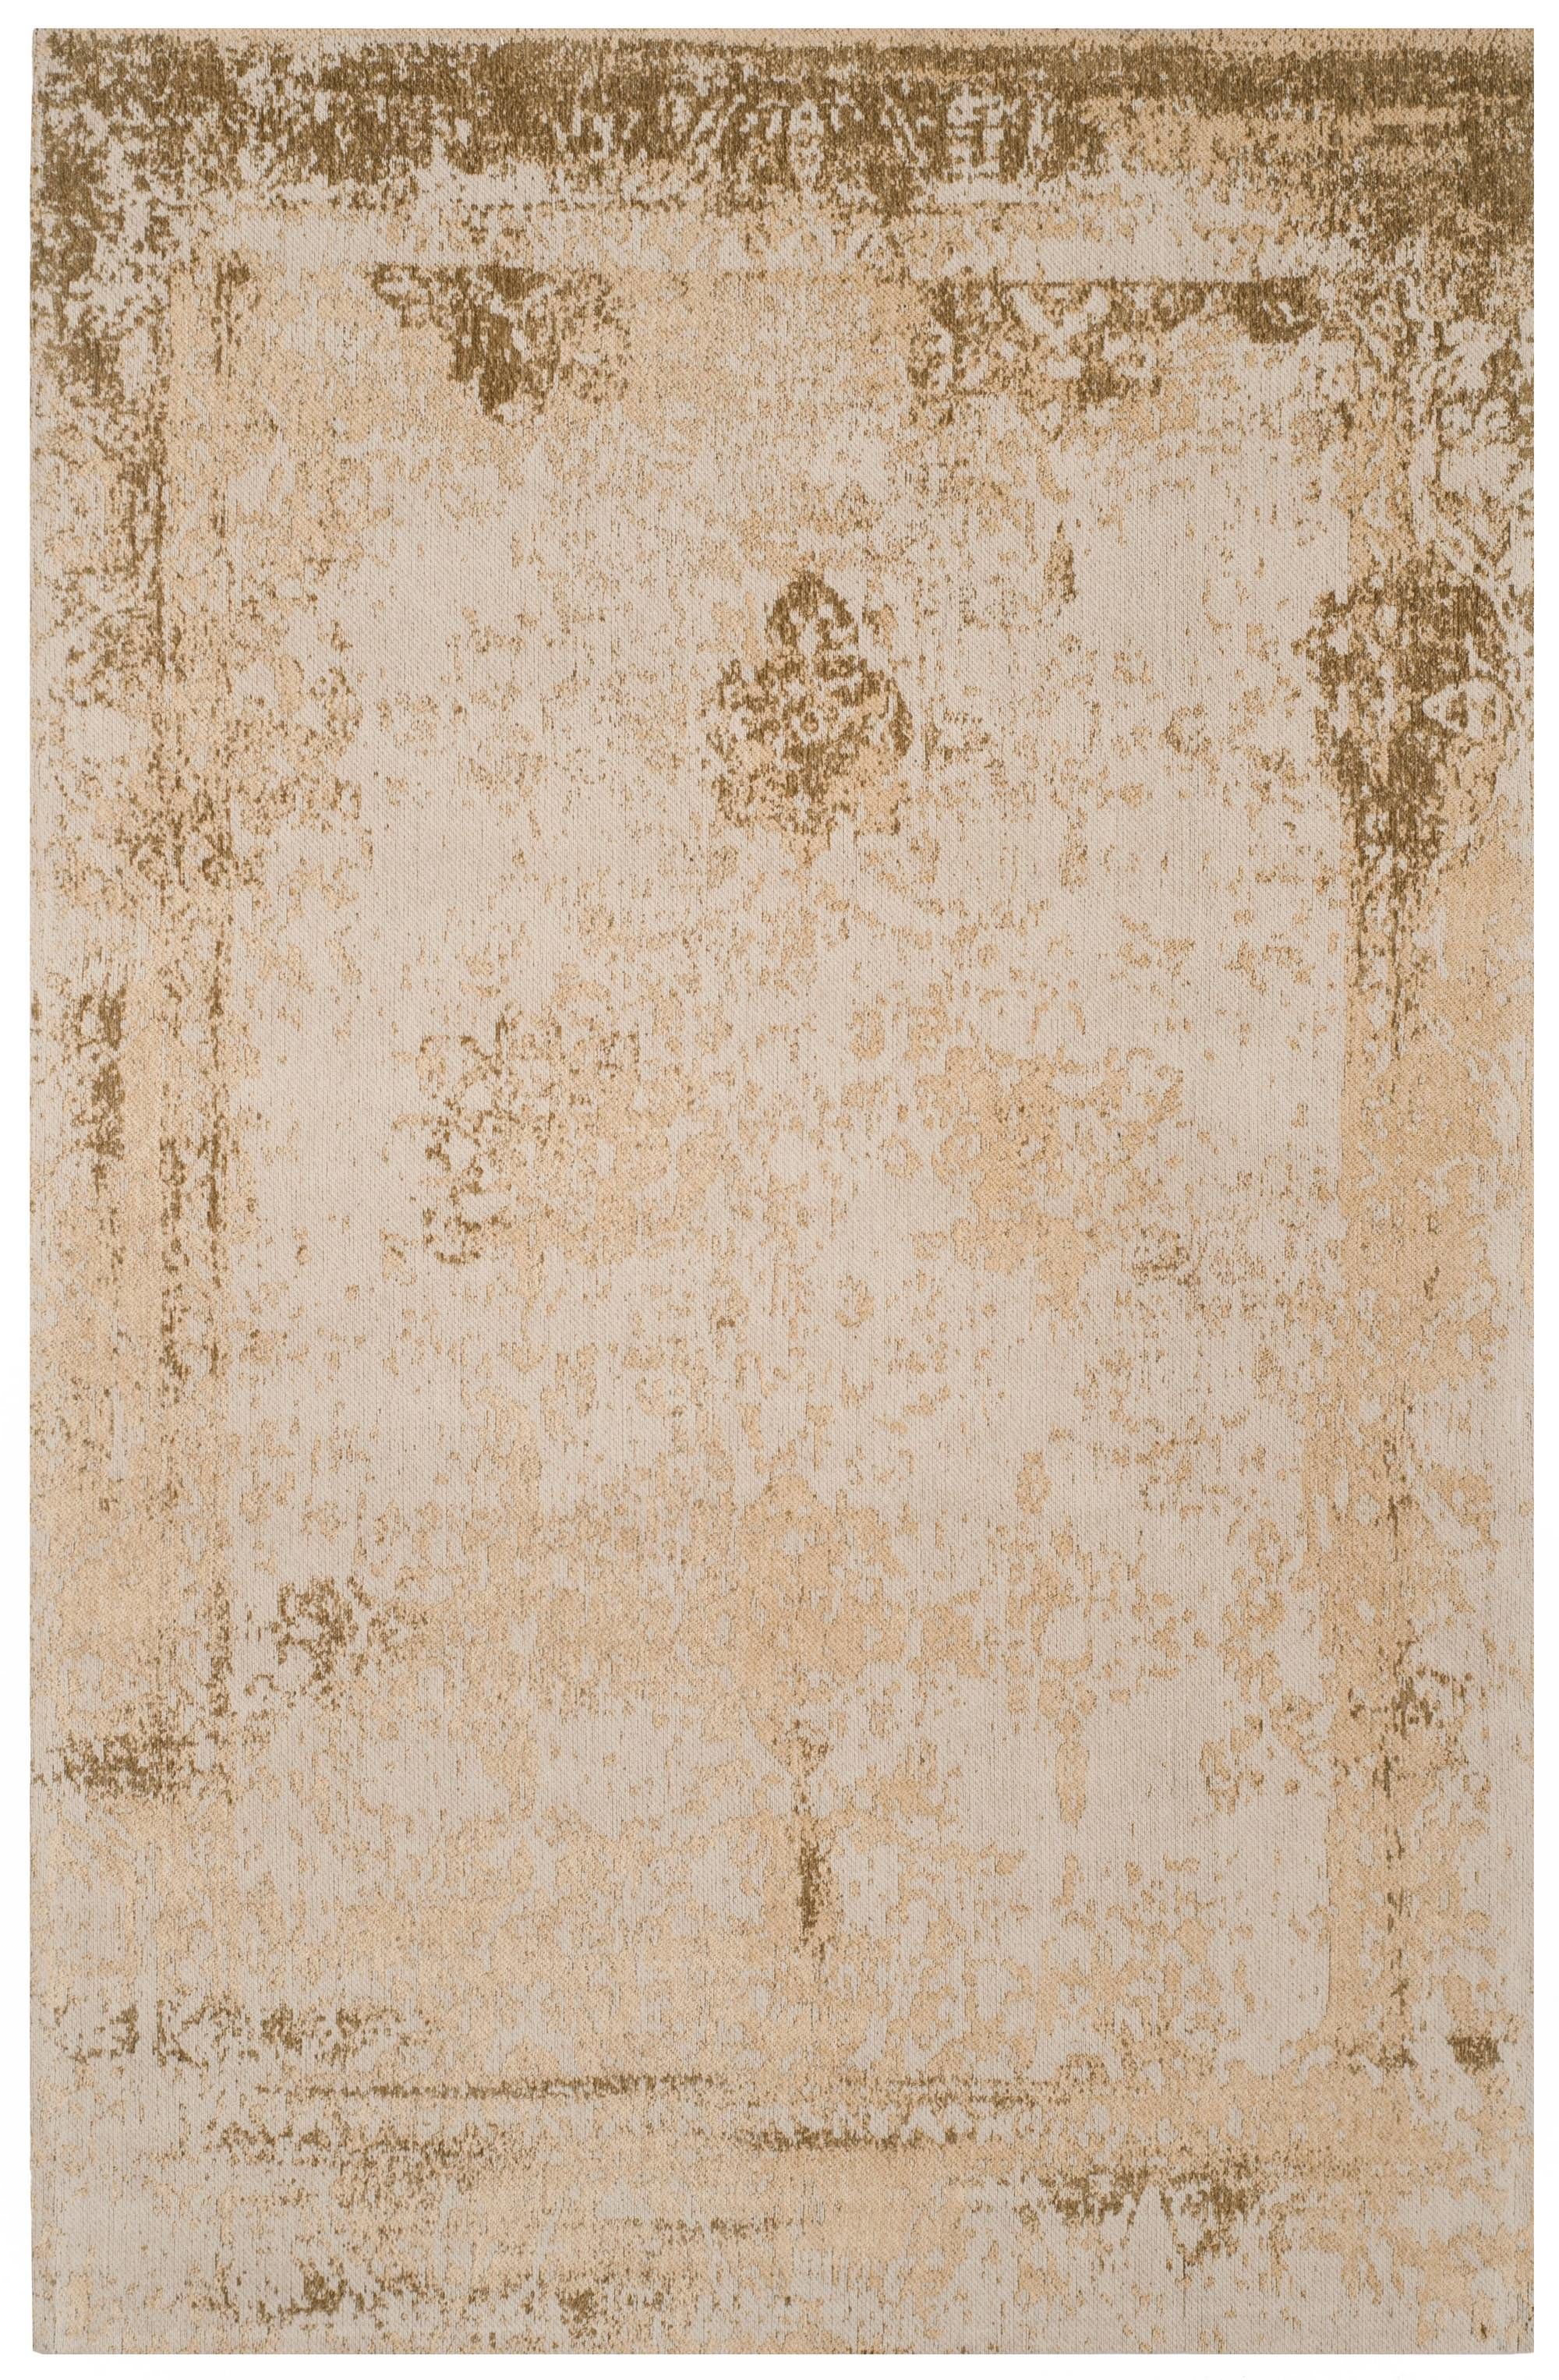 Red Safavieh Classic Vintage Collection CLV125B Distressed Cotton Area Rug 5' x 8' 